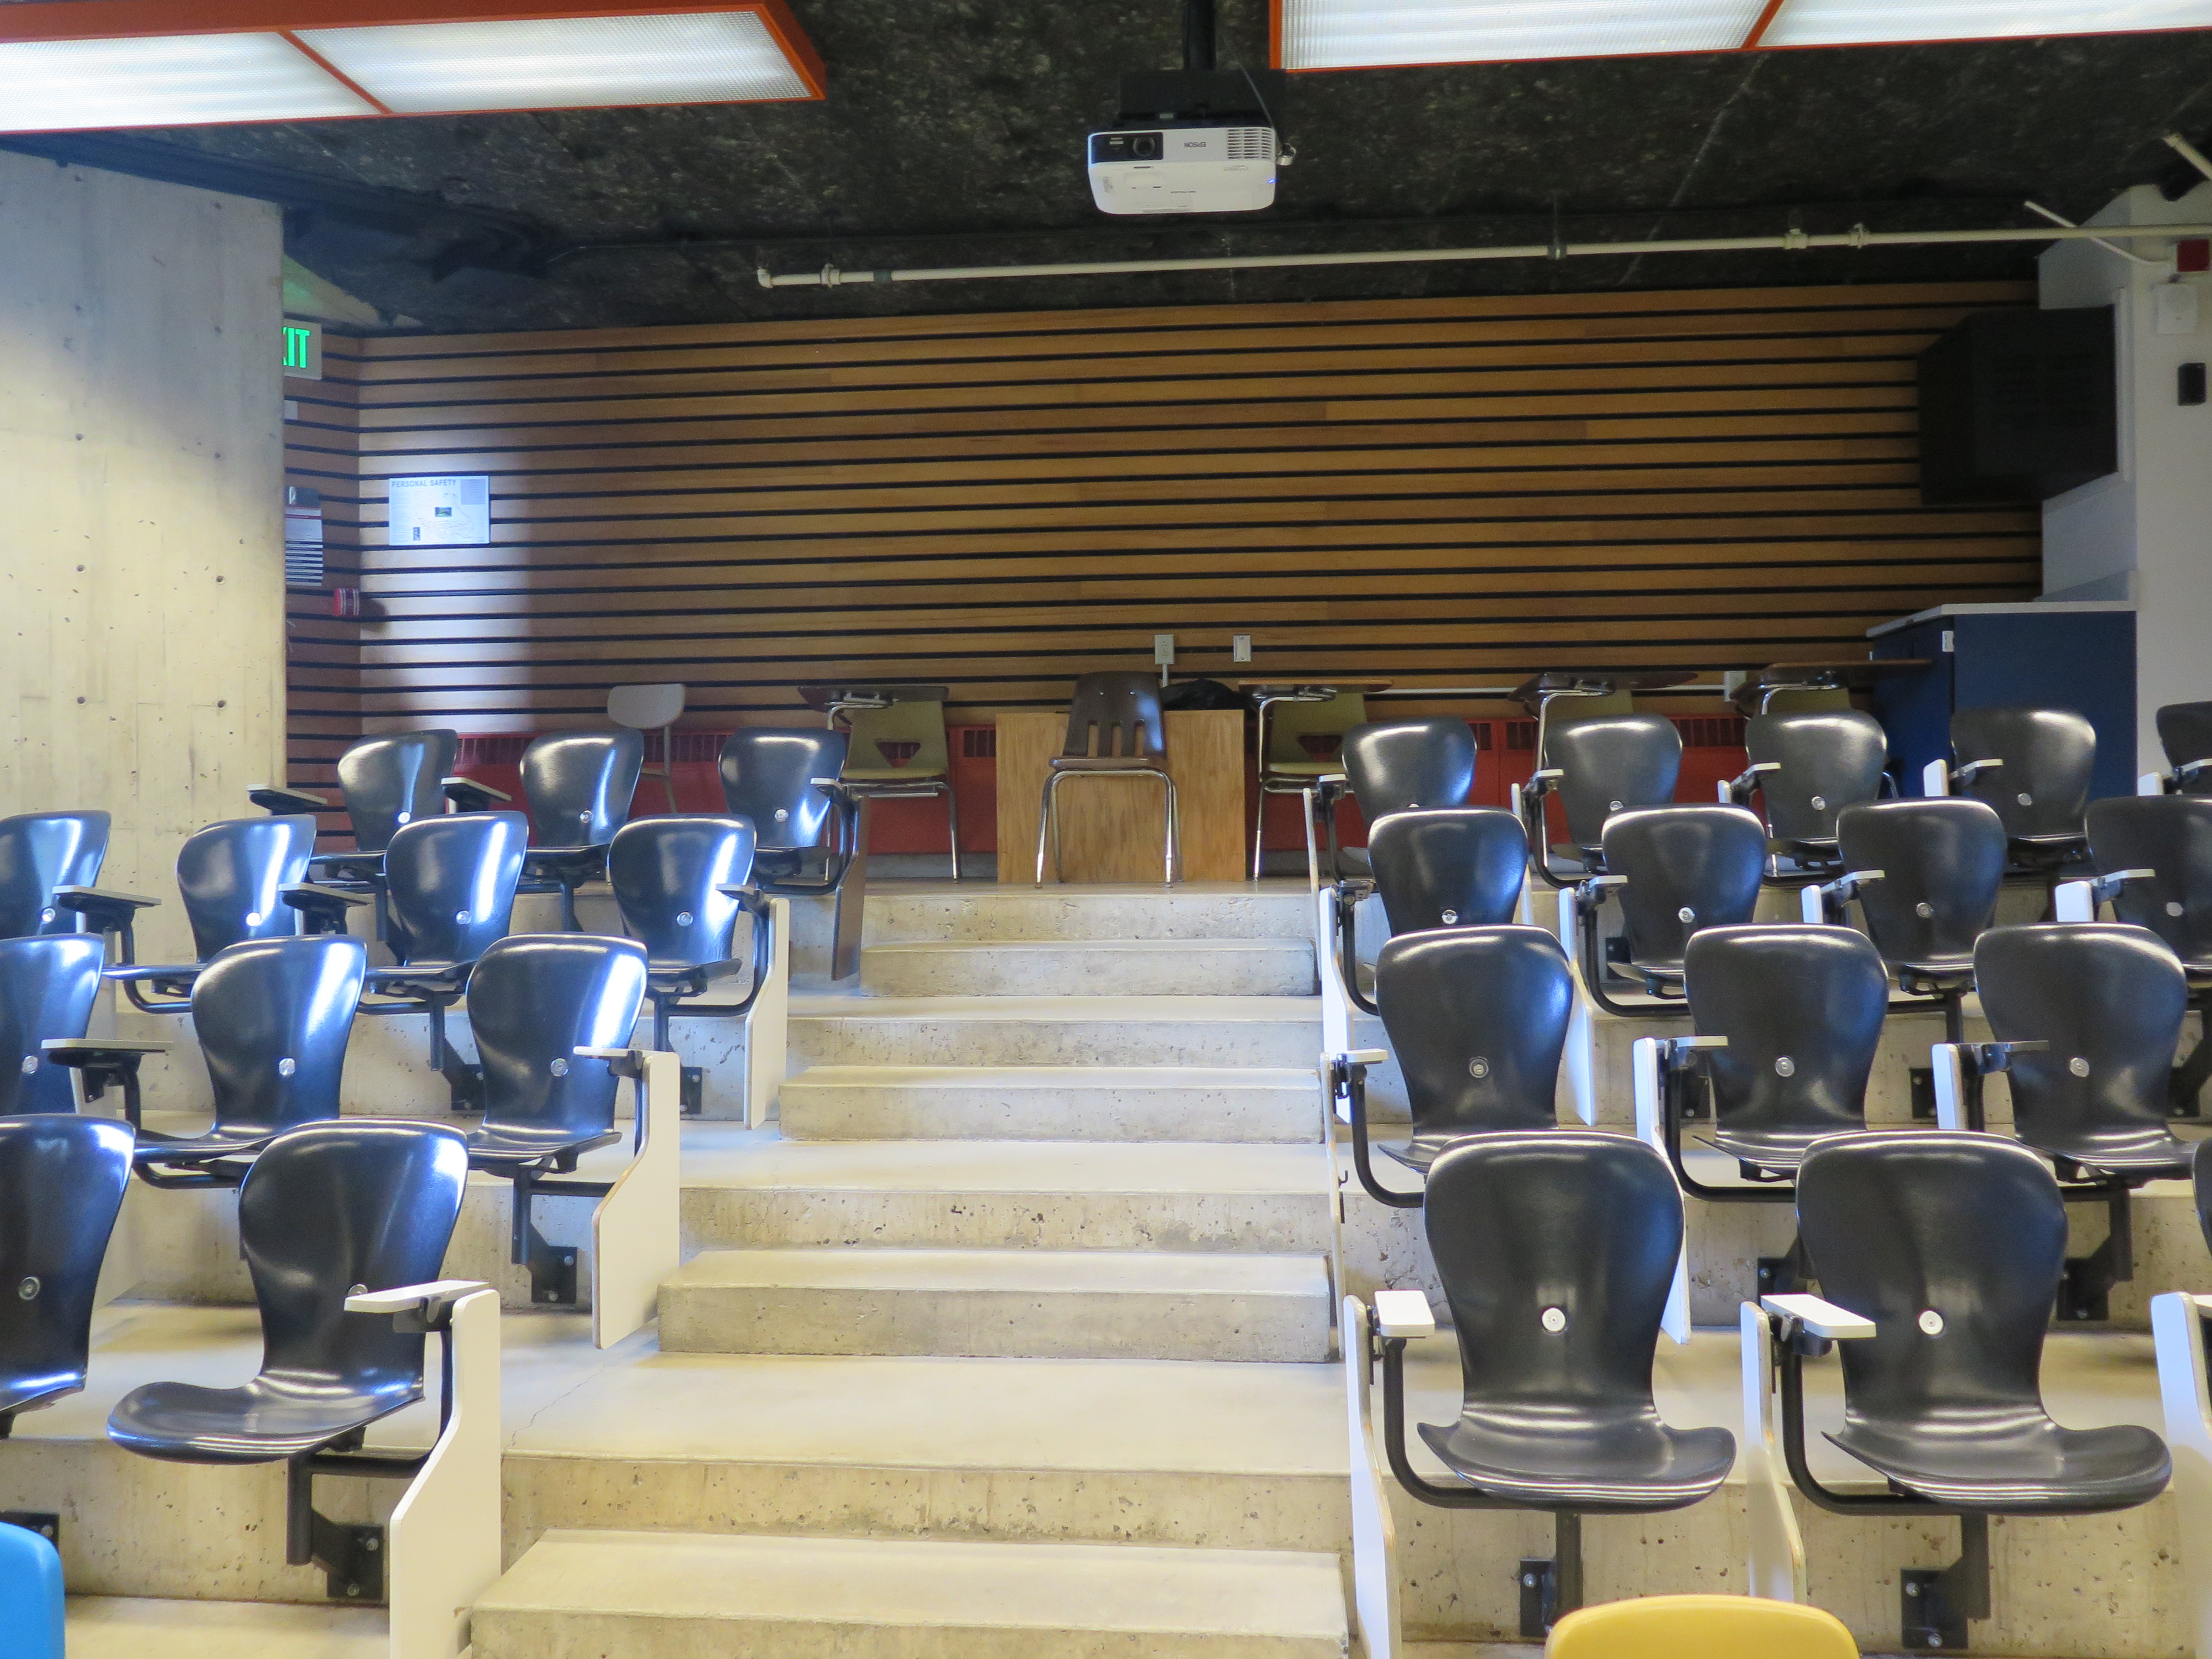 Room Consists of auditorium style, stationary tablet armchairs, White board and podium are located at the front of the room.